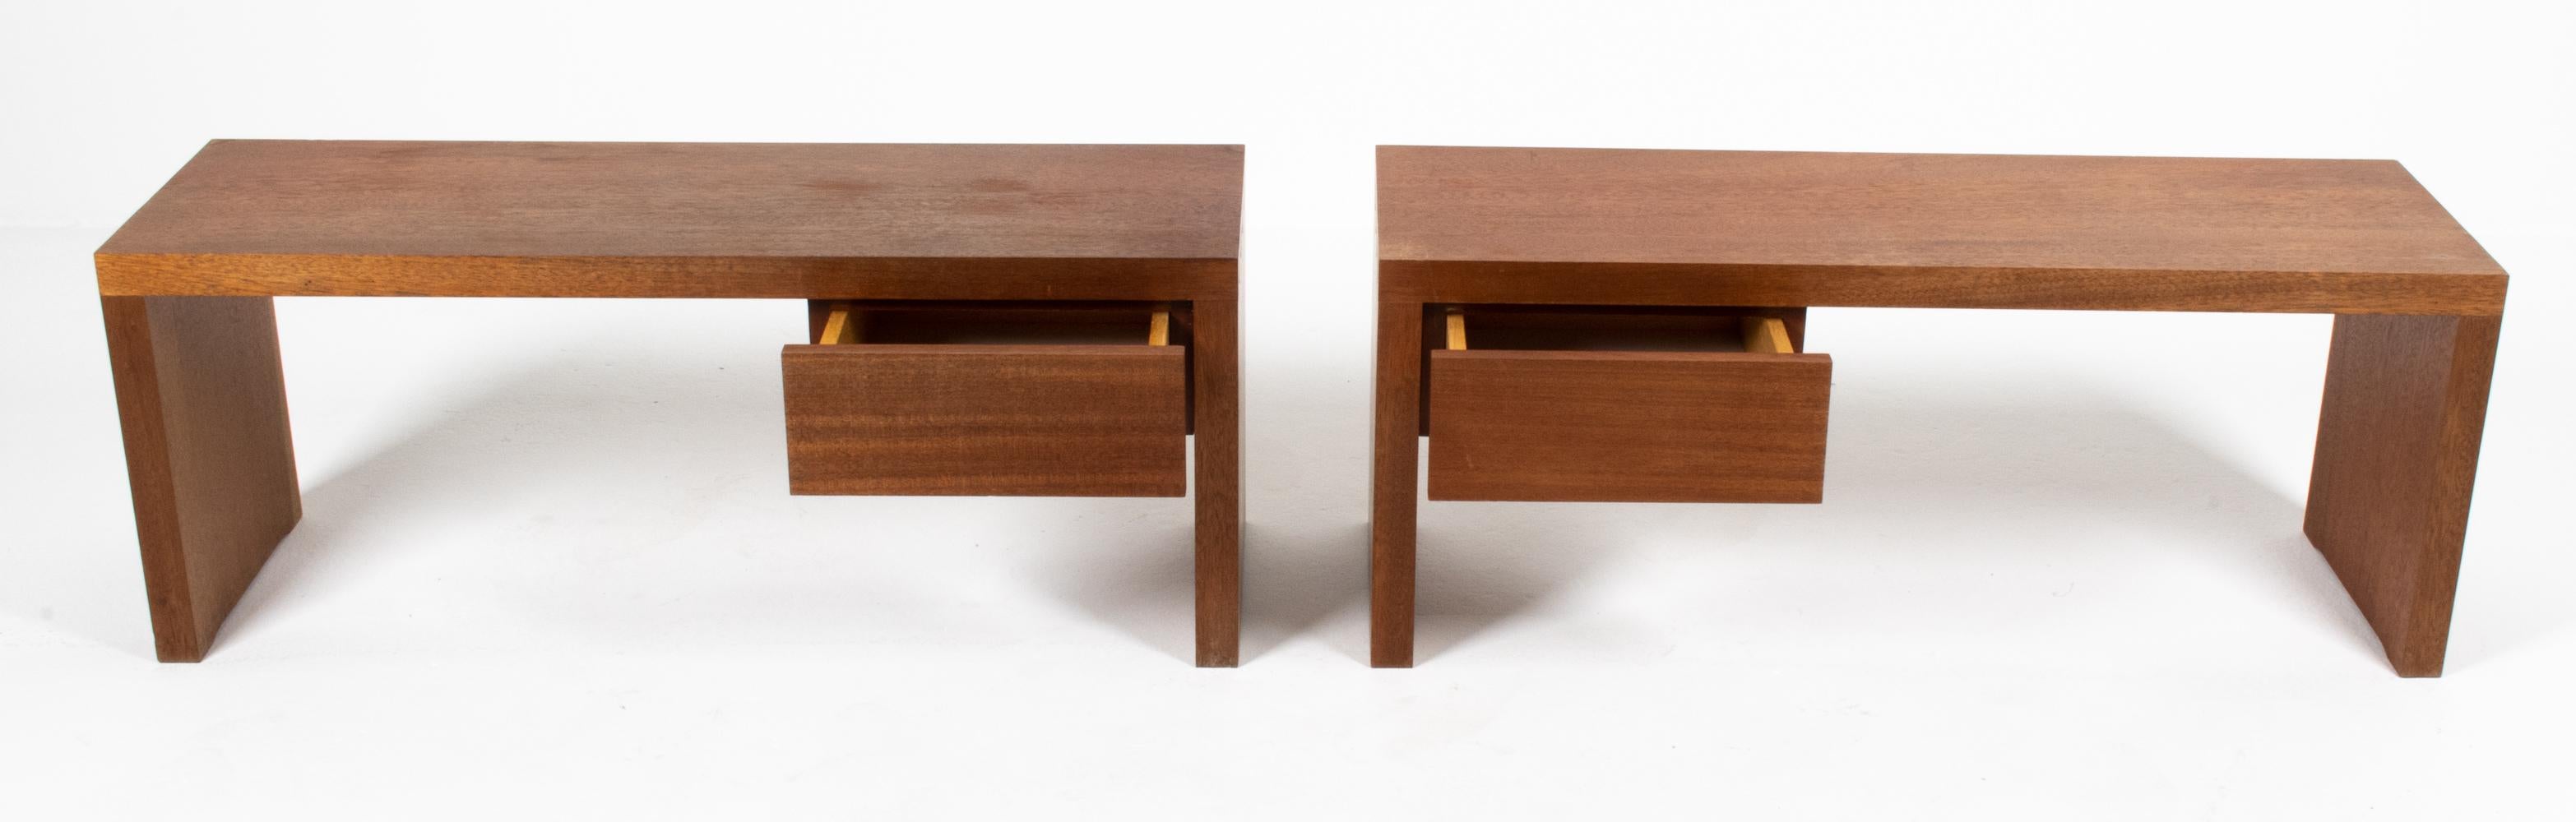 Pair of Mid-Century Modern Dovetailed Teak Nightstands or Benches For Sale 1